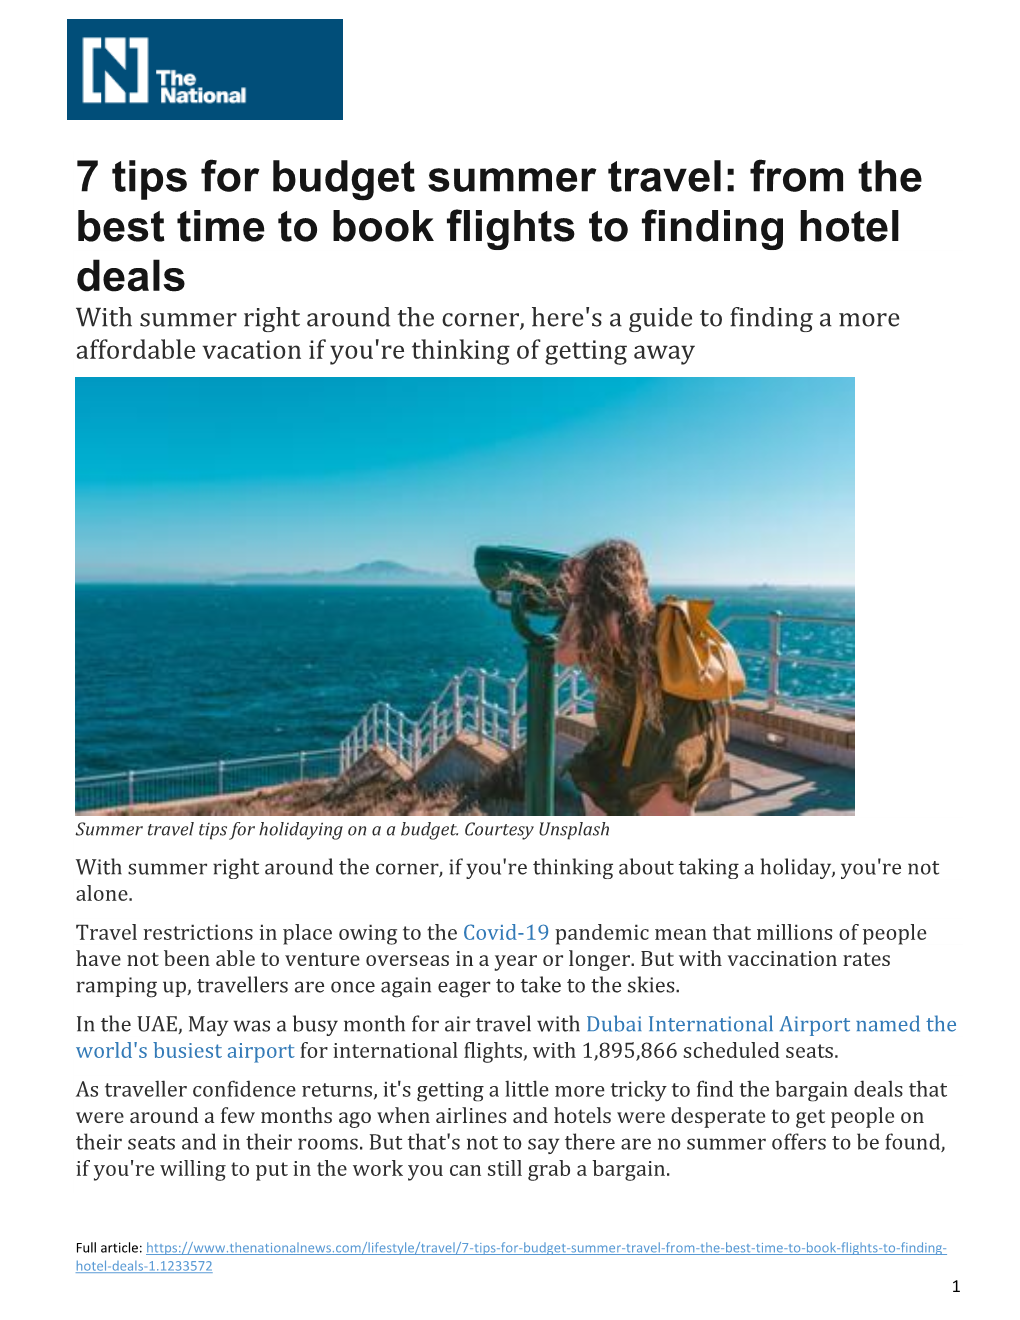 7 Tips for Budget Summer Travel